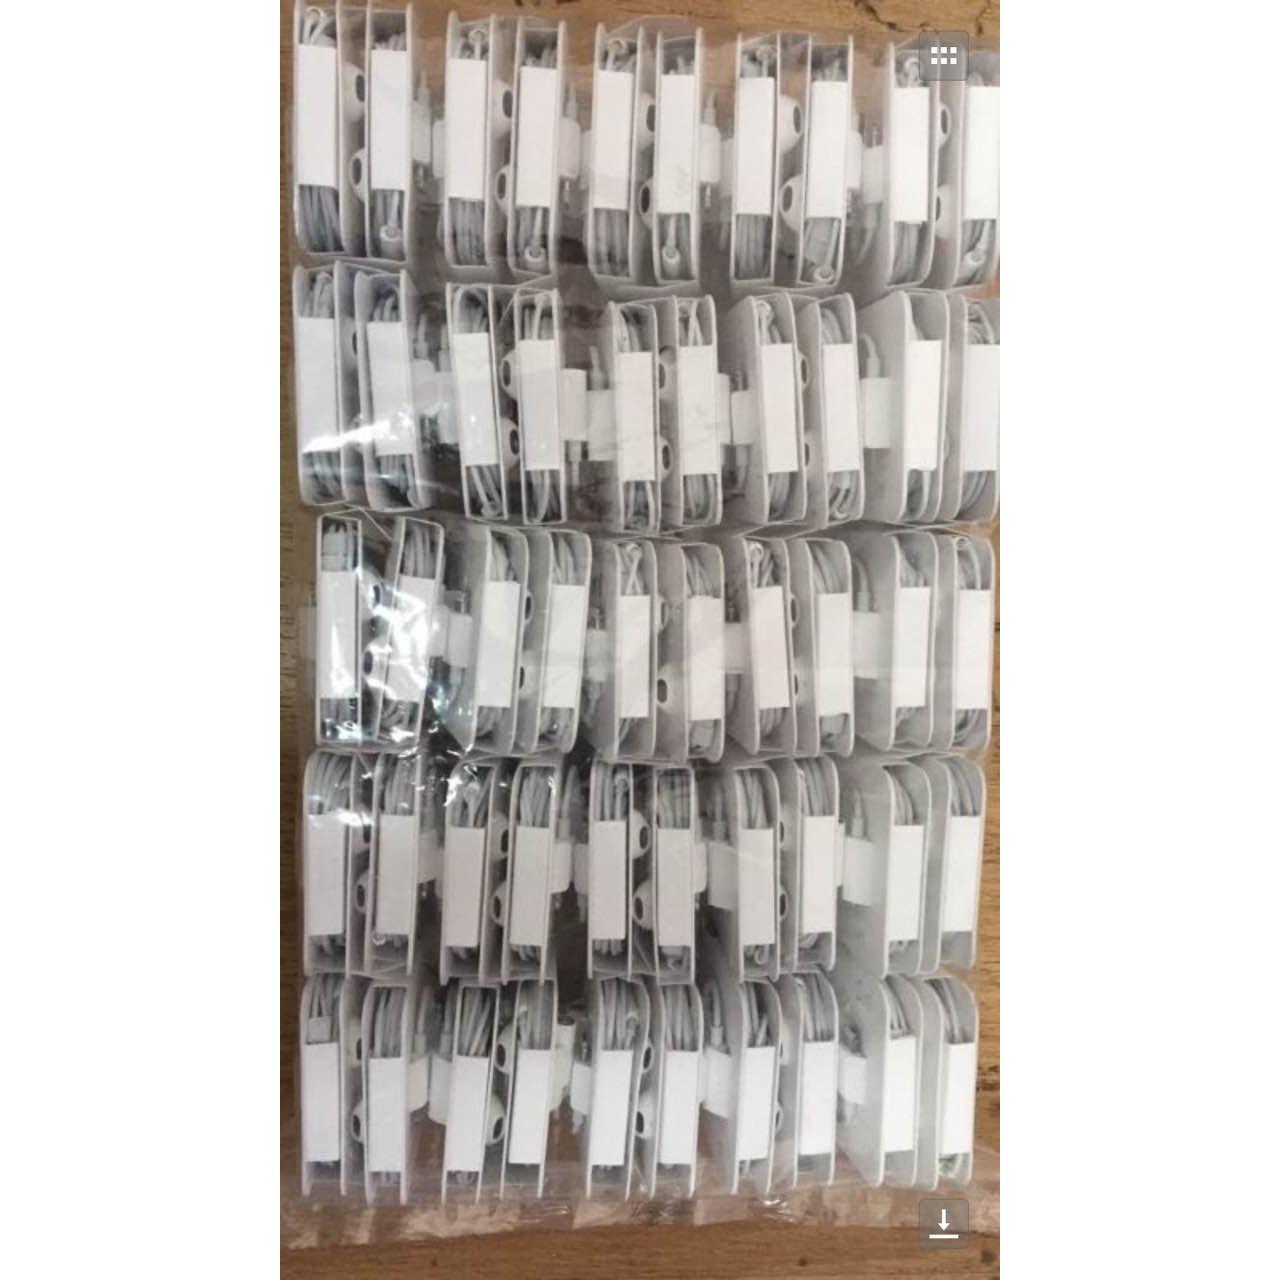 Apple Apple iPhone 7 Earpods with Adapter Wholesale Suppliers